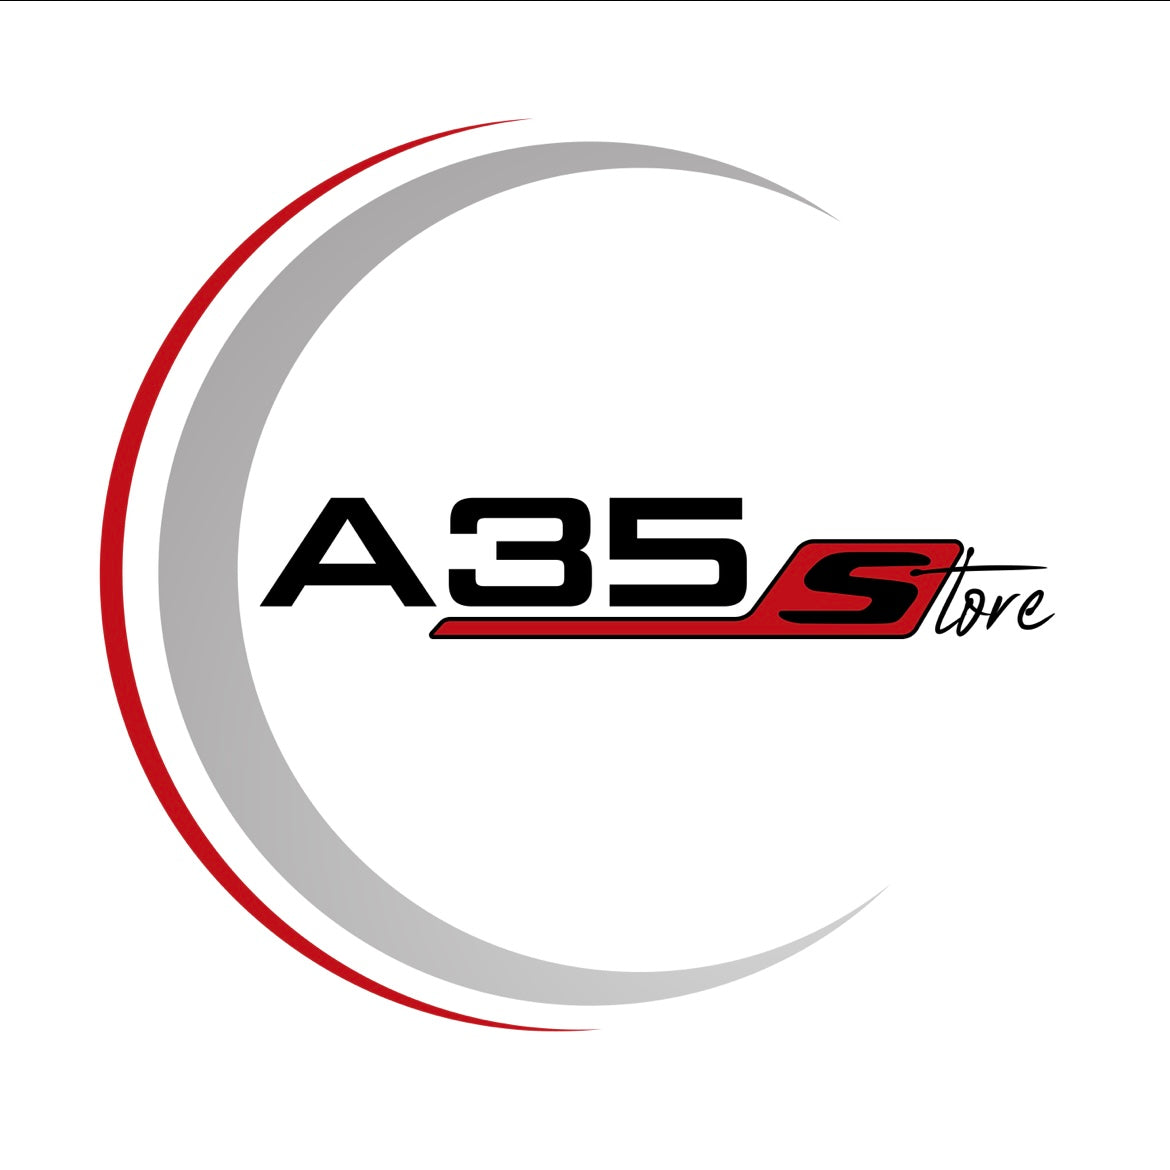 A35 Store